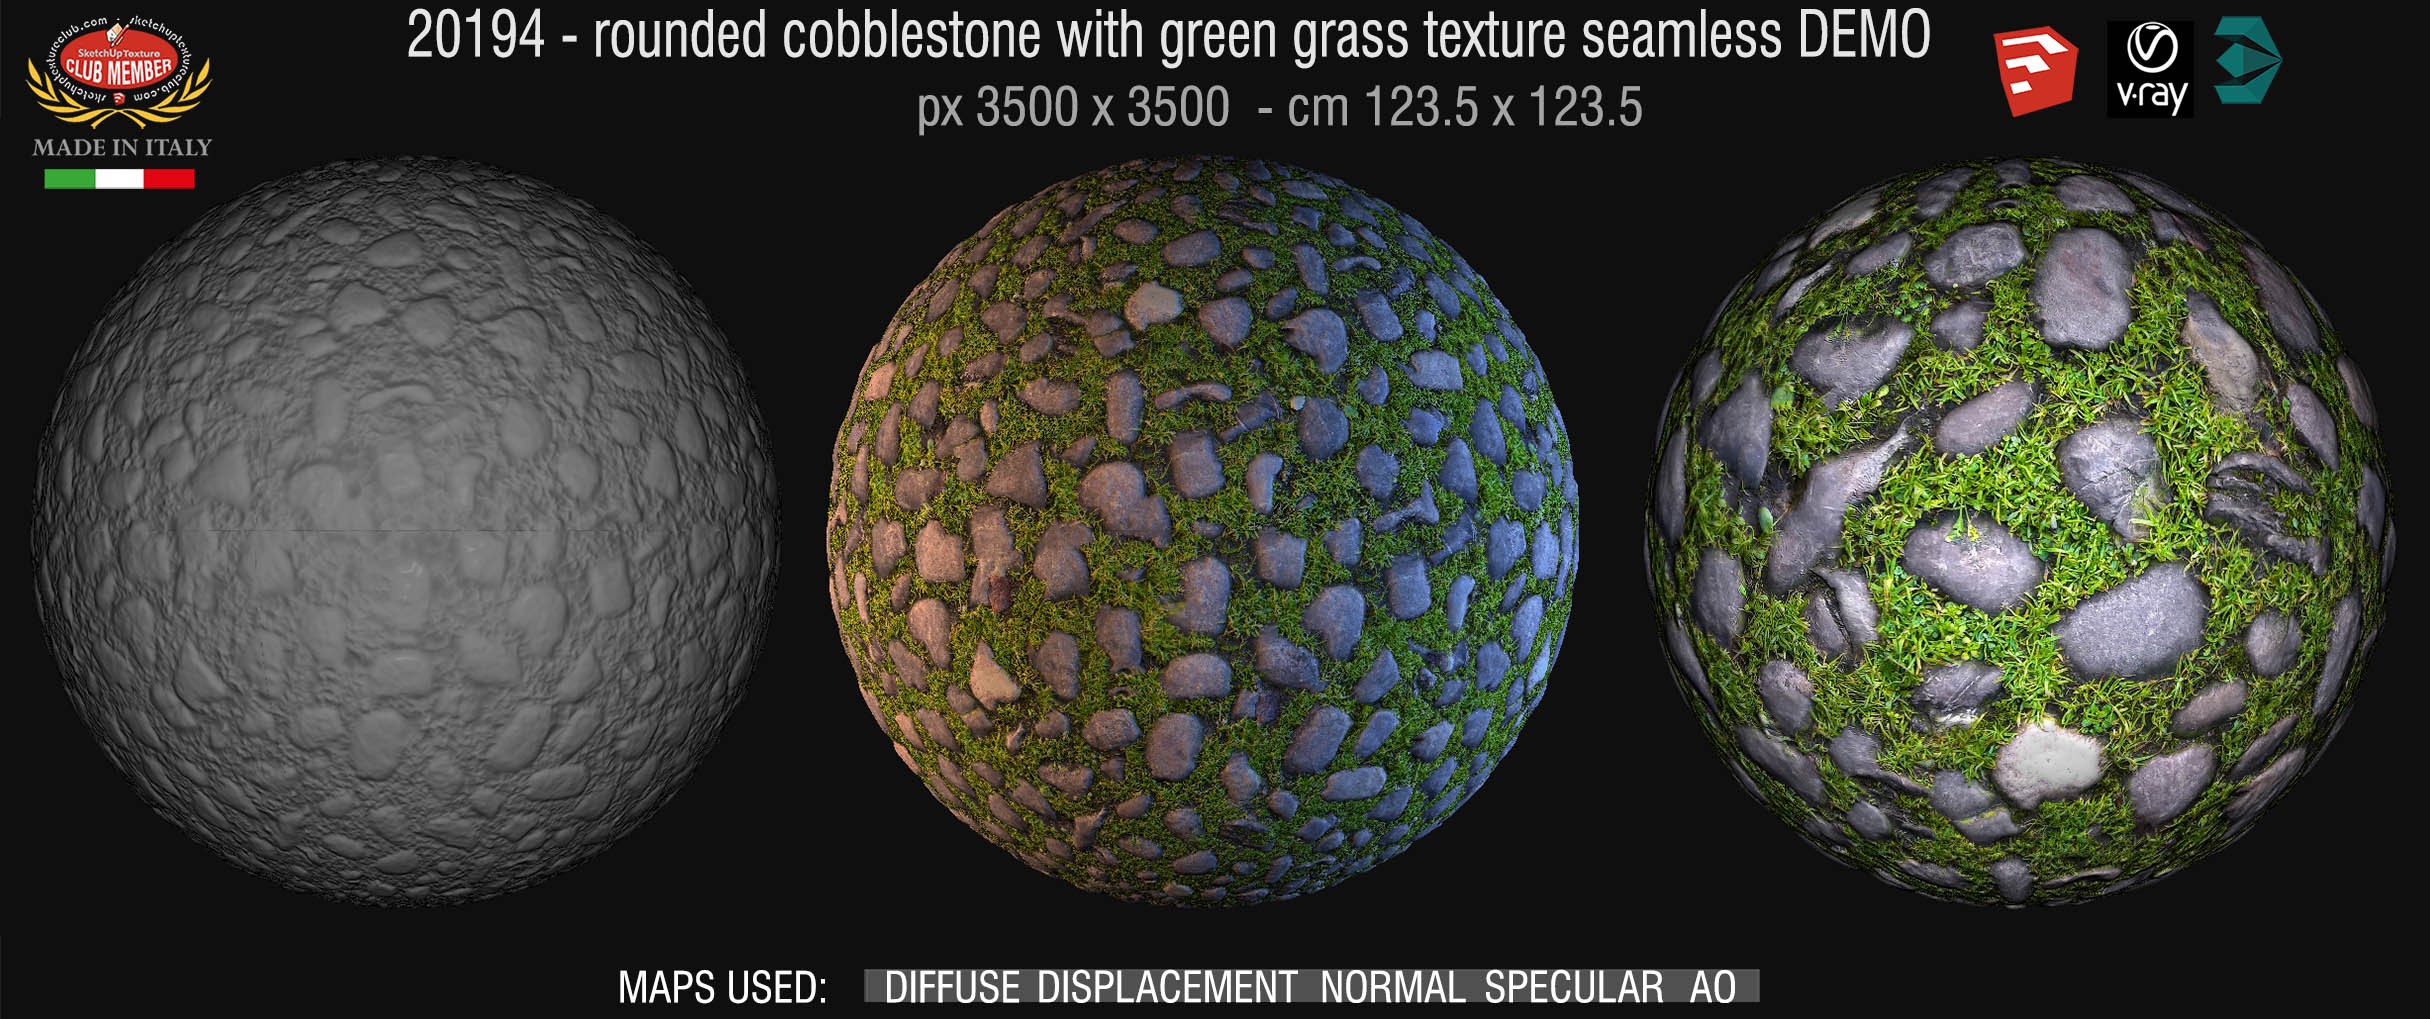 20194 Road rounded cobblestone with green grass texture seamless + maps DEMO